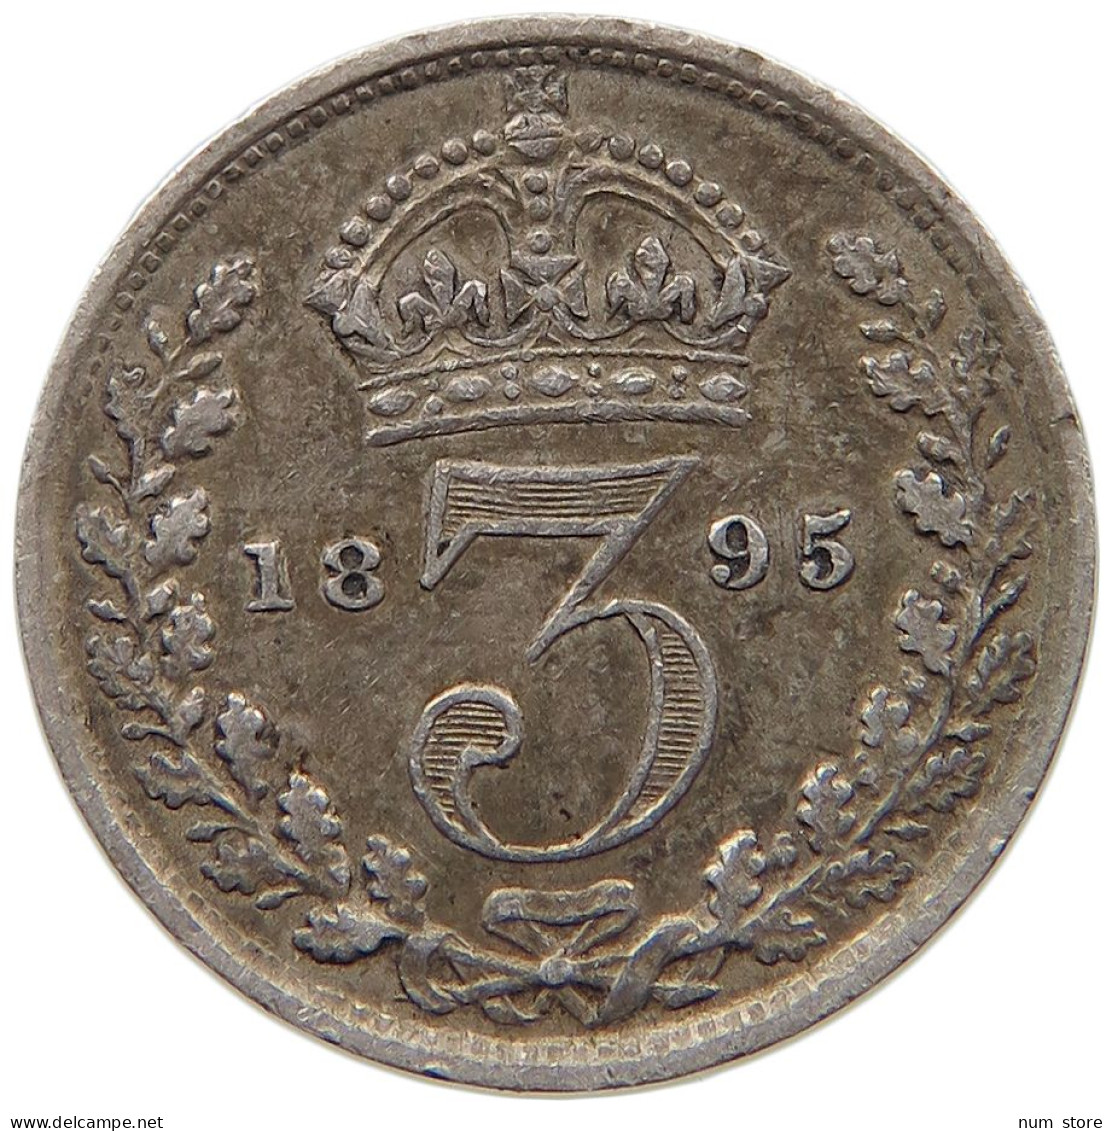 GREAT BRITAIN THREEPENCE 1895 Victoria 1837-1901 #c016 0339 - F. 3 Pence